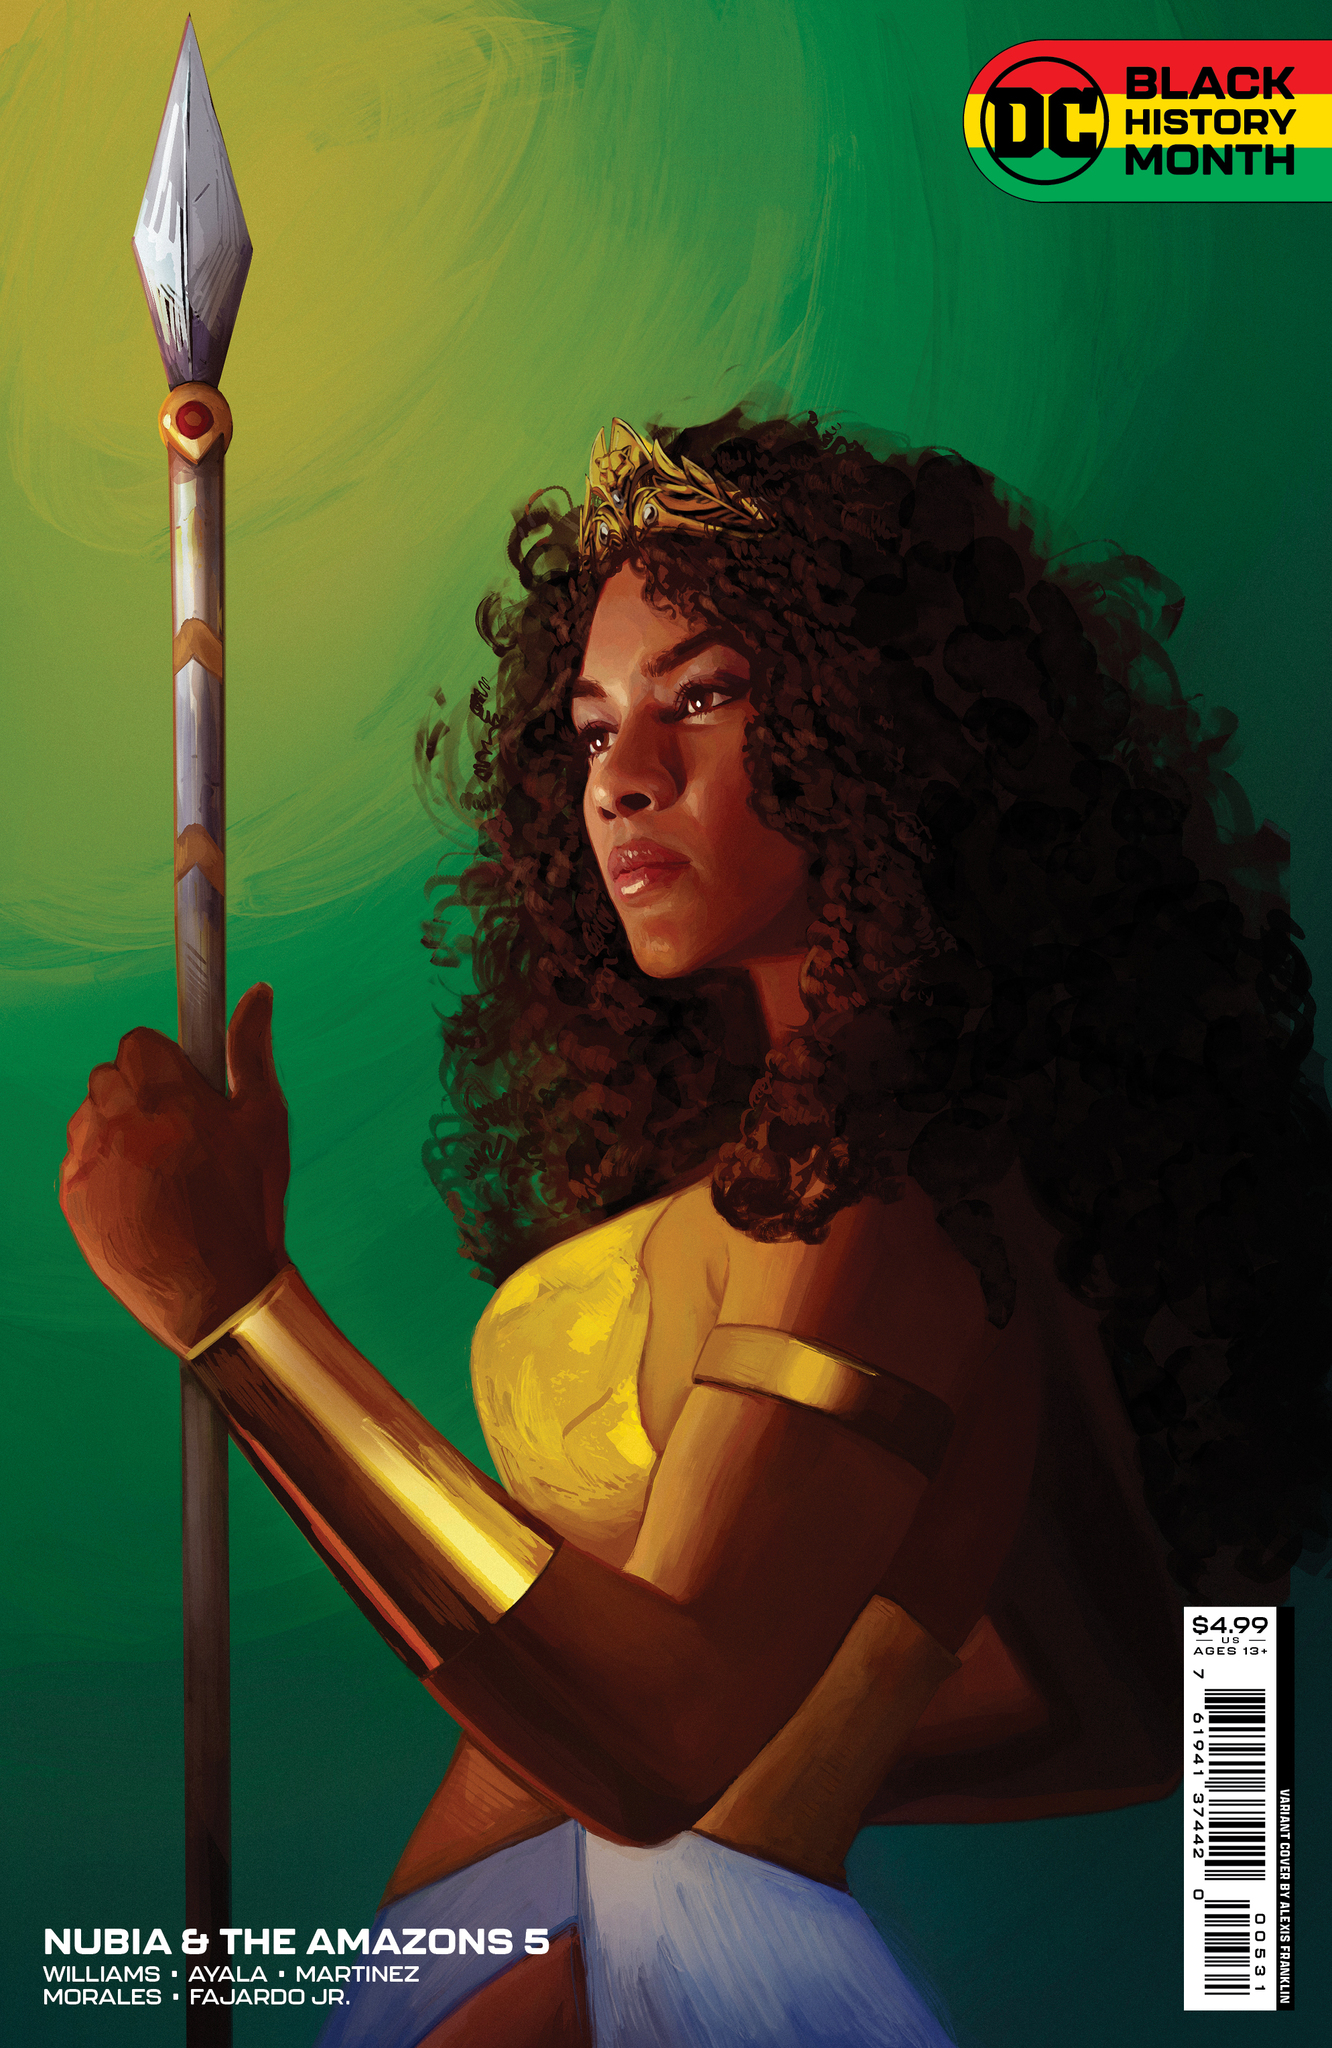 Nubia and the Amazons #5 Cover C Alexis Franklin Black History Month Card Stock Variant (Of 6)